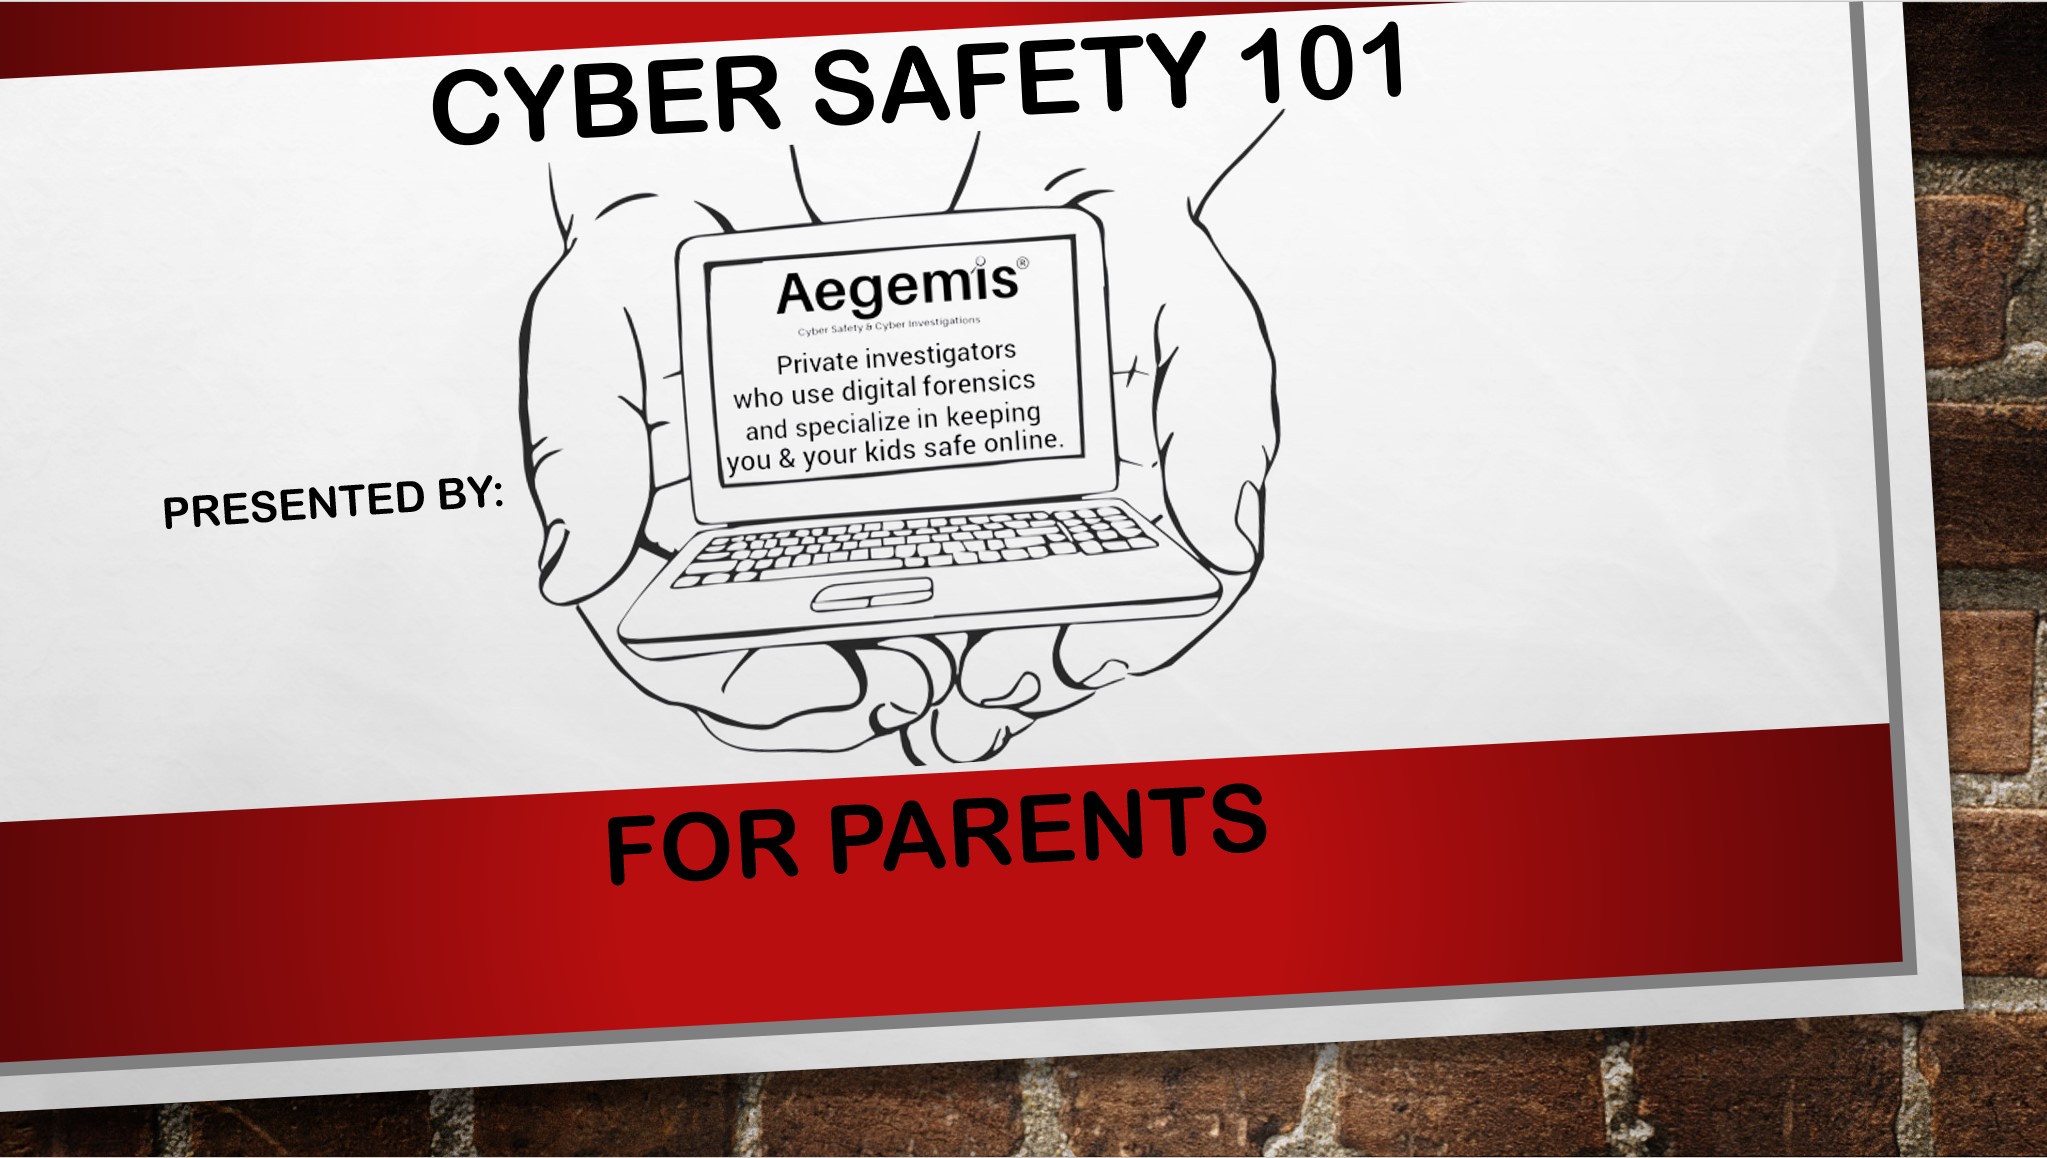 Cyber safety 101 for parents.